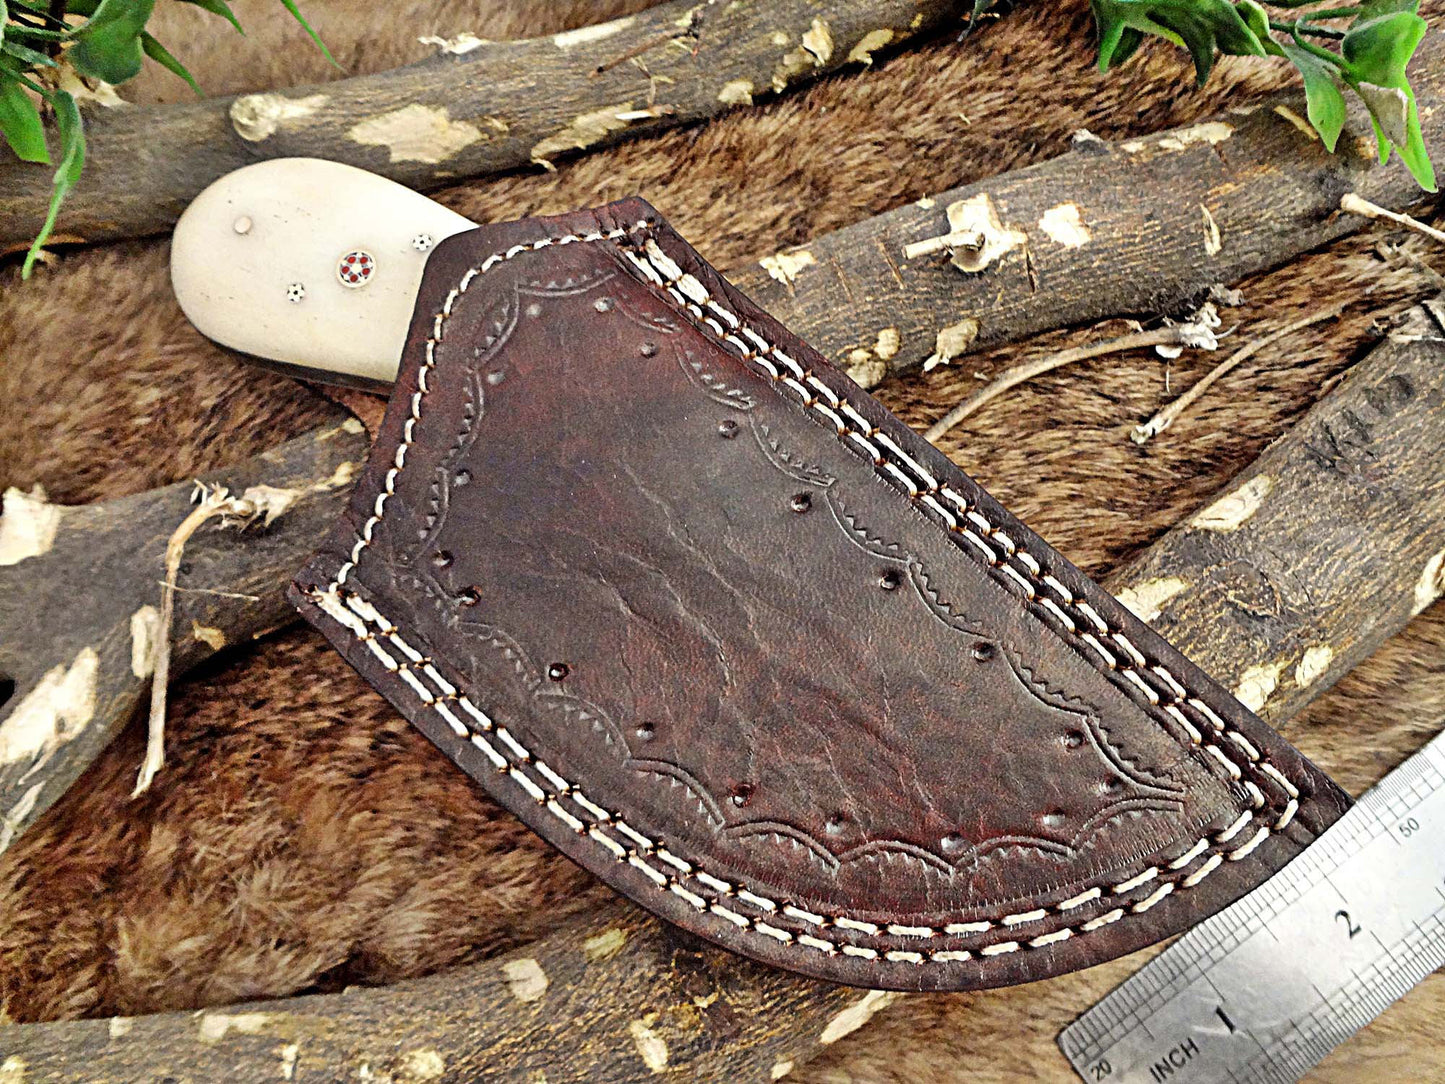 7" long Hand Forged Damascus Steel wide blade Pocket Knife with 3.5" cutting edge, available in 4 Natural scales, Includes Cow leather sheath